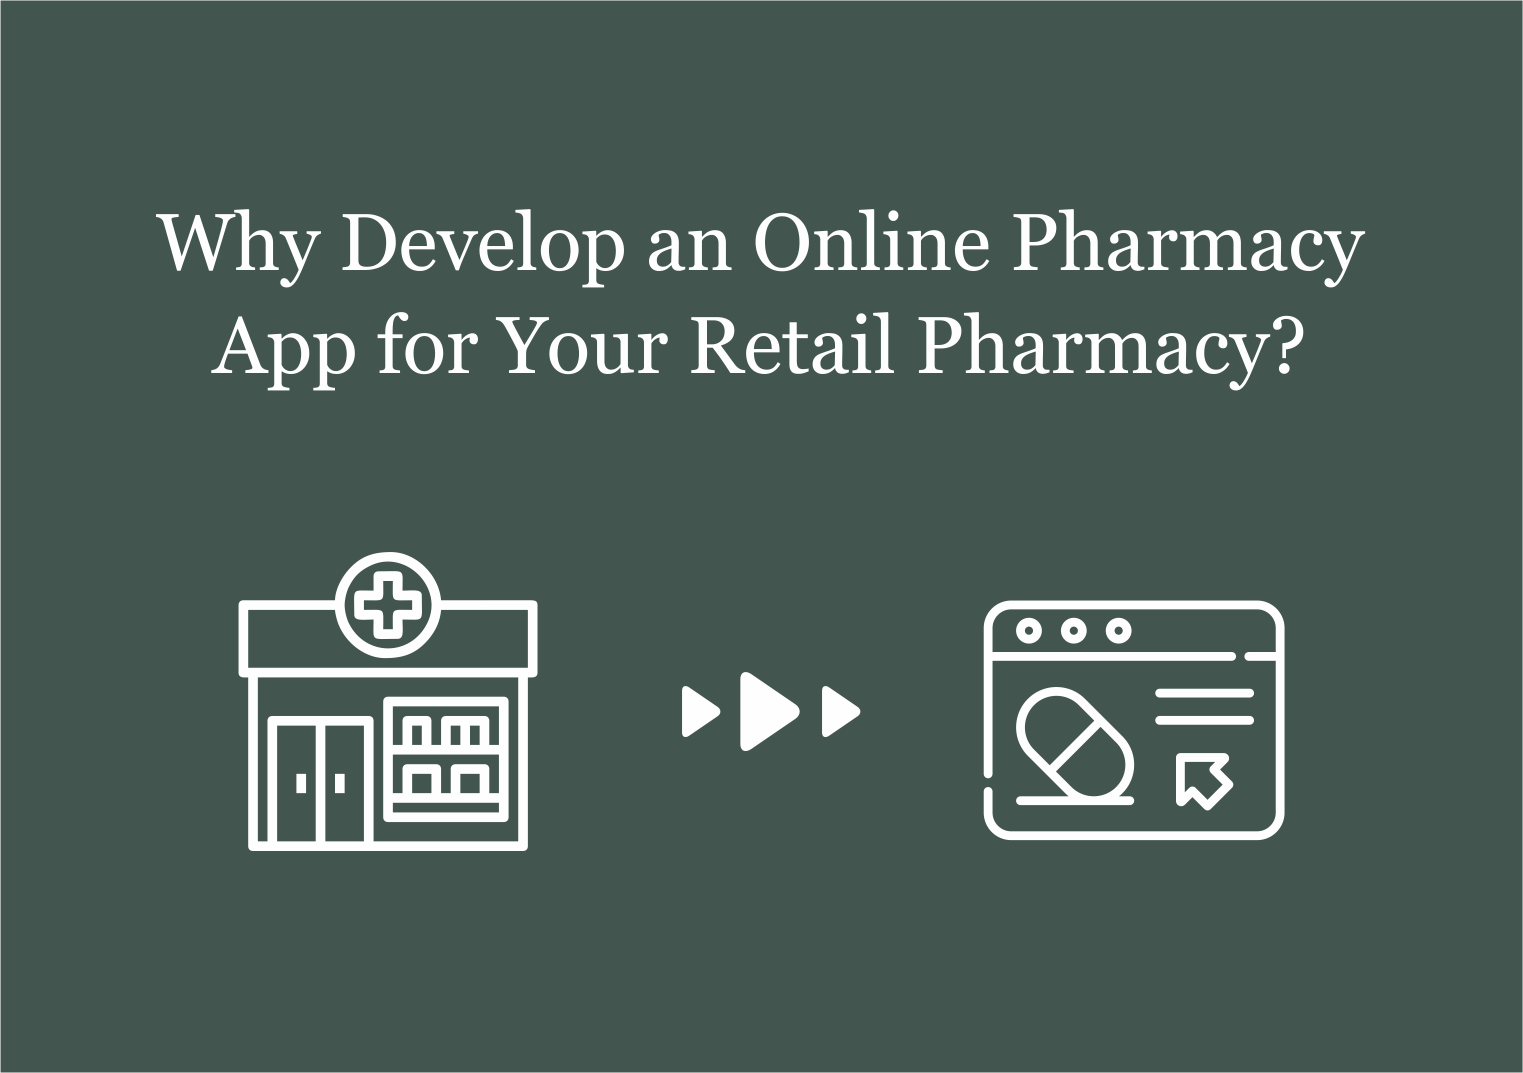 Why Develop an Online Pharmacy App for Your Retail Pharmacy?